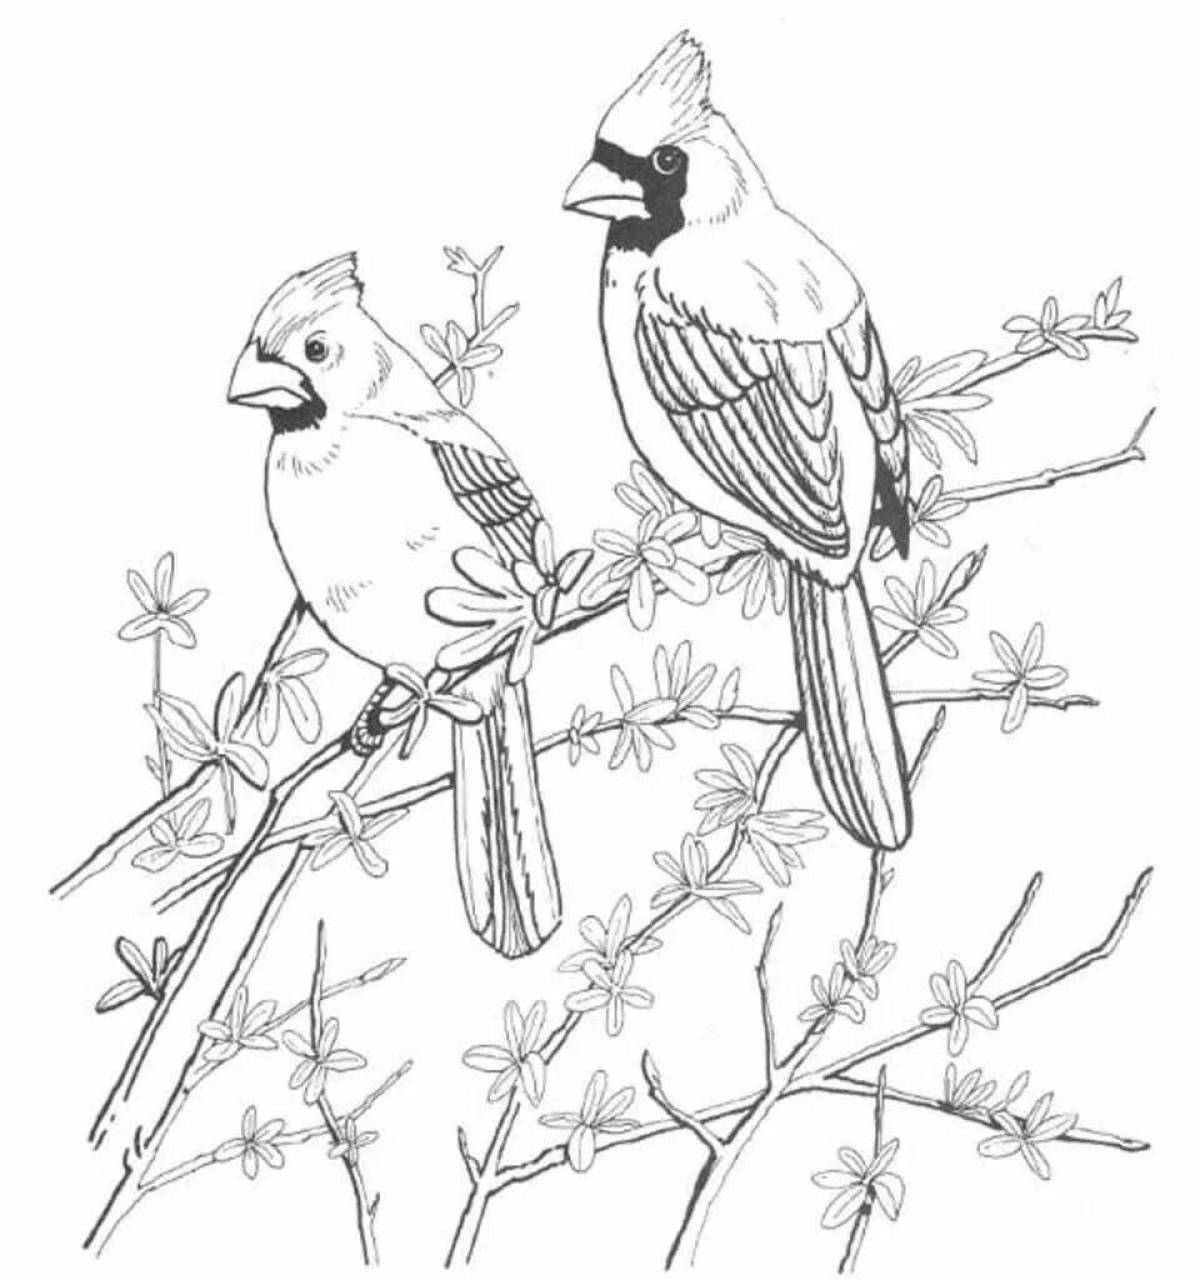 Cute waxwing coloring book for kids